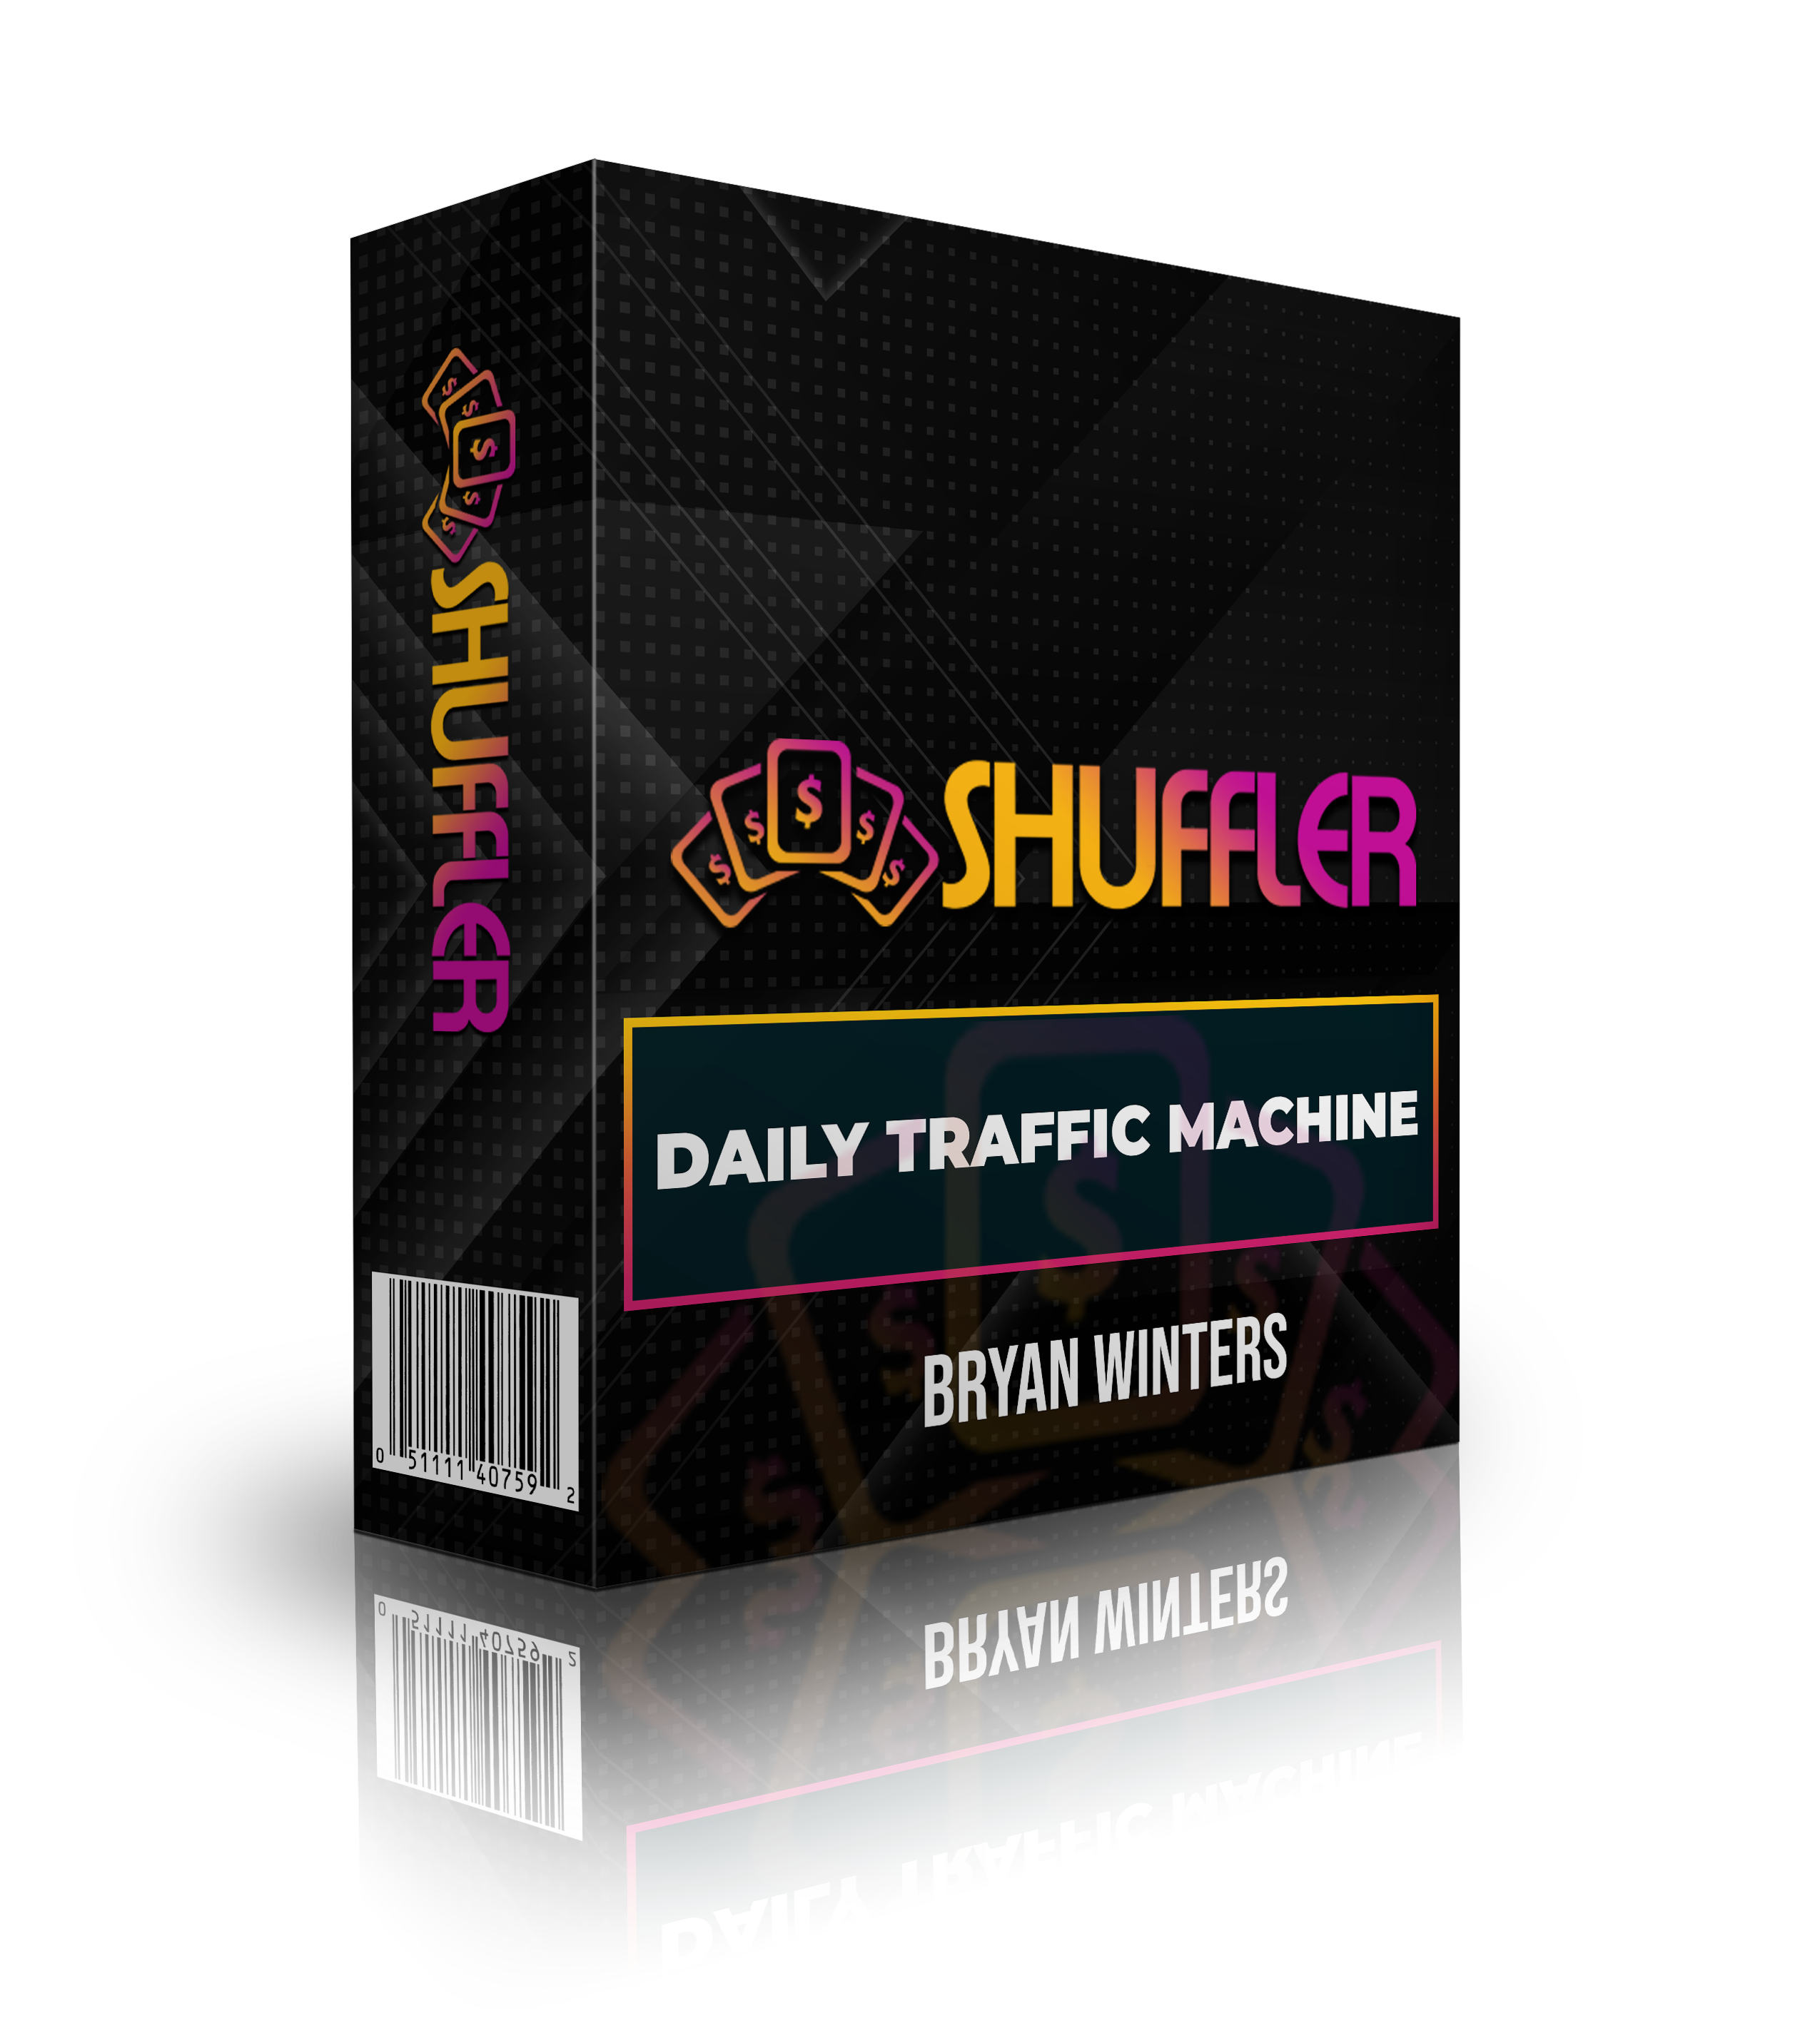 OTO 1 - SHUFFLER'S DAILY TRAFFIC MACHINE - $97 With $67 Downsell. "Daily Traffic Machine" unlocks true autopilot traffic - guaranteed visitors delivered 24-7 into users' SHUFFLER funnels..